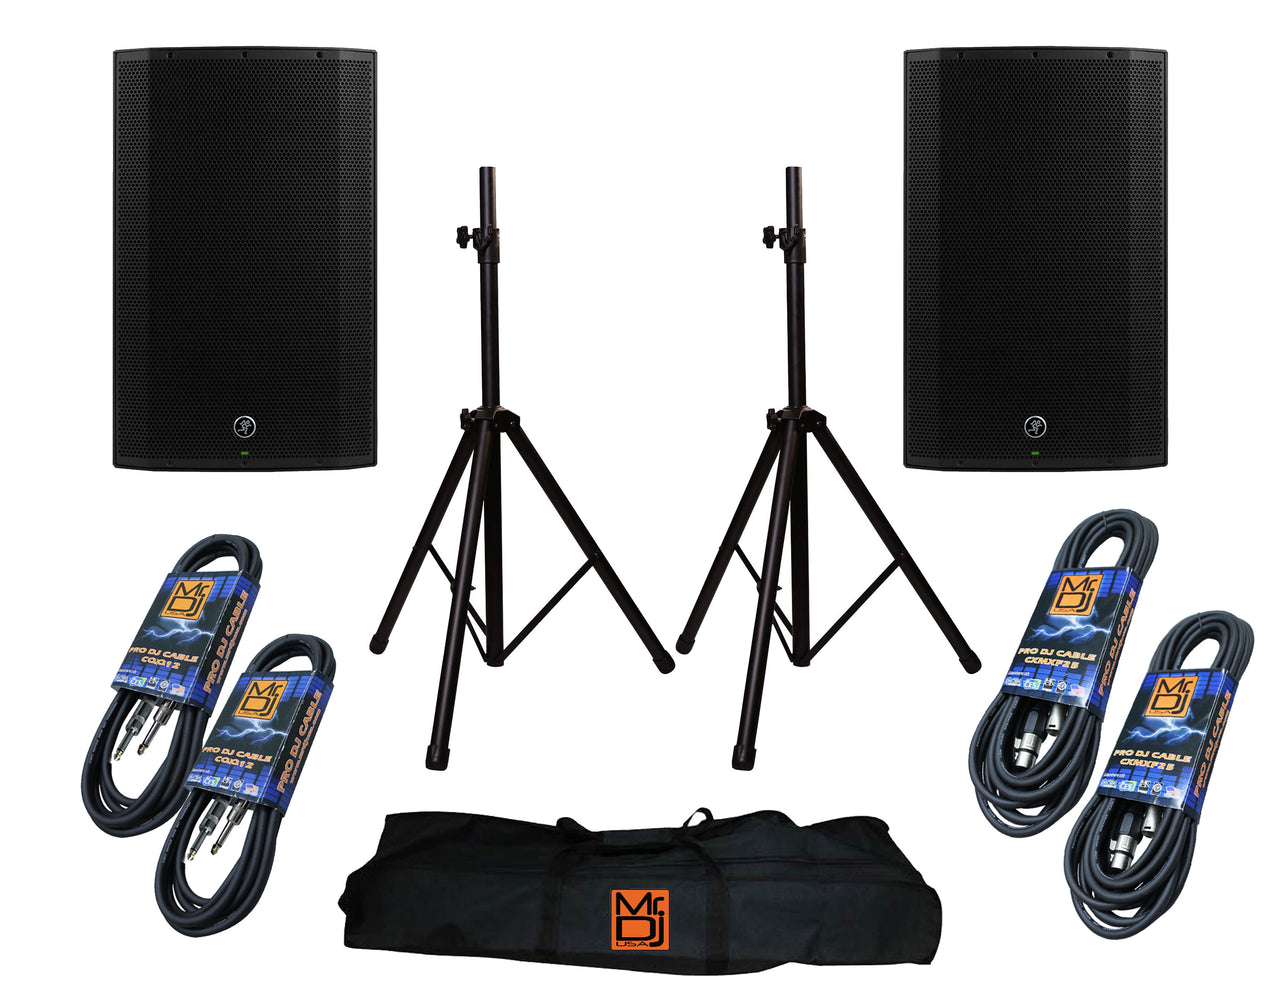 Mackie Thump212 12" Powered Loudspeaker with MR DJ Heavy Duty Aluminum Speaker Stands with 1/4 inch Cables, Carrying Case & 2 XLR Cables Bundle